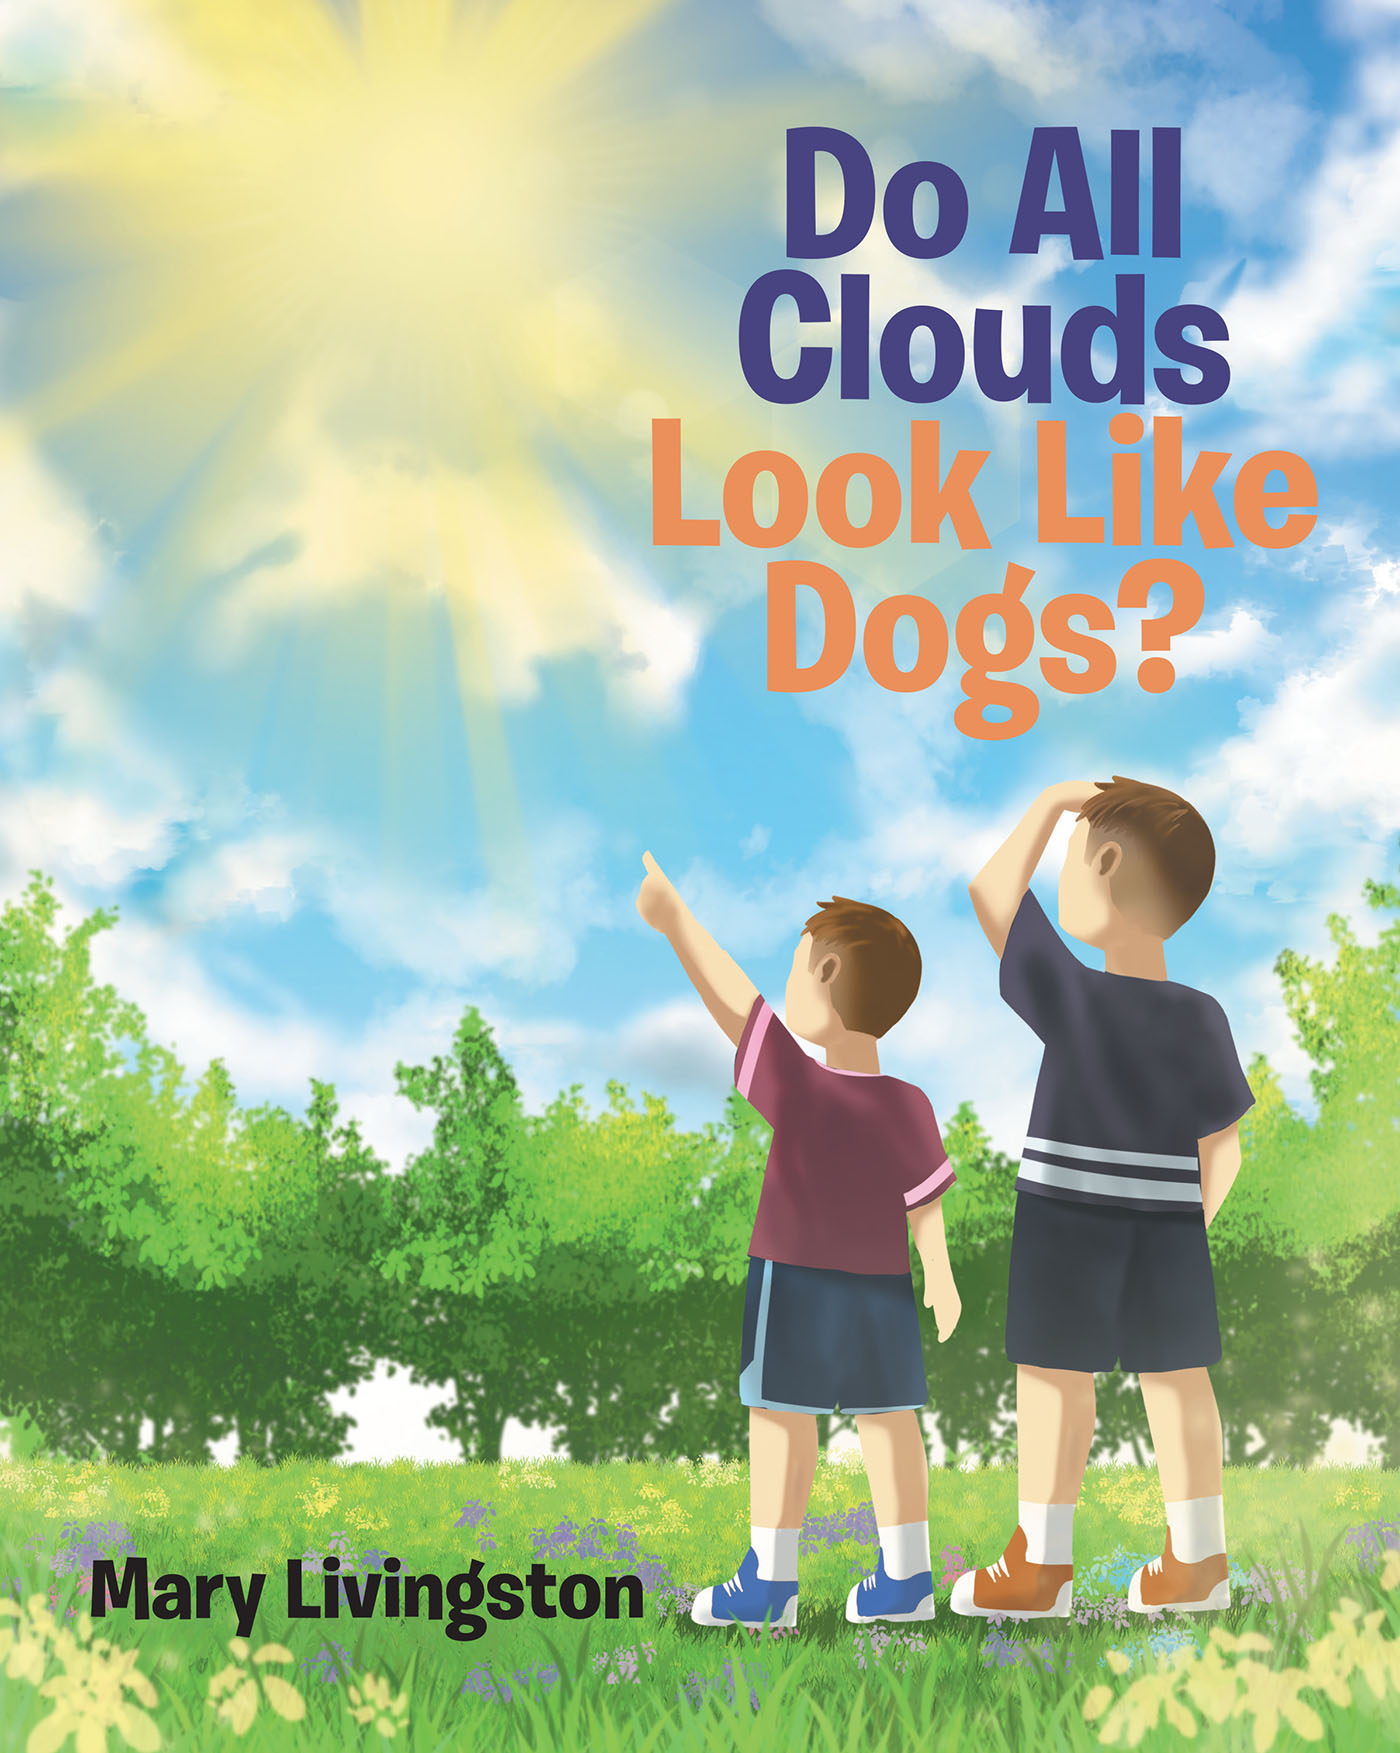 Author Mary Livingston’s New Book "Do All Clouds Look Like Dogs?" is a Riveting Story of Two Brothers Who Find a New Outdoor Activity They Can Enjoy Together